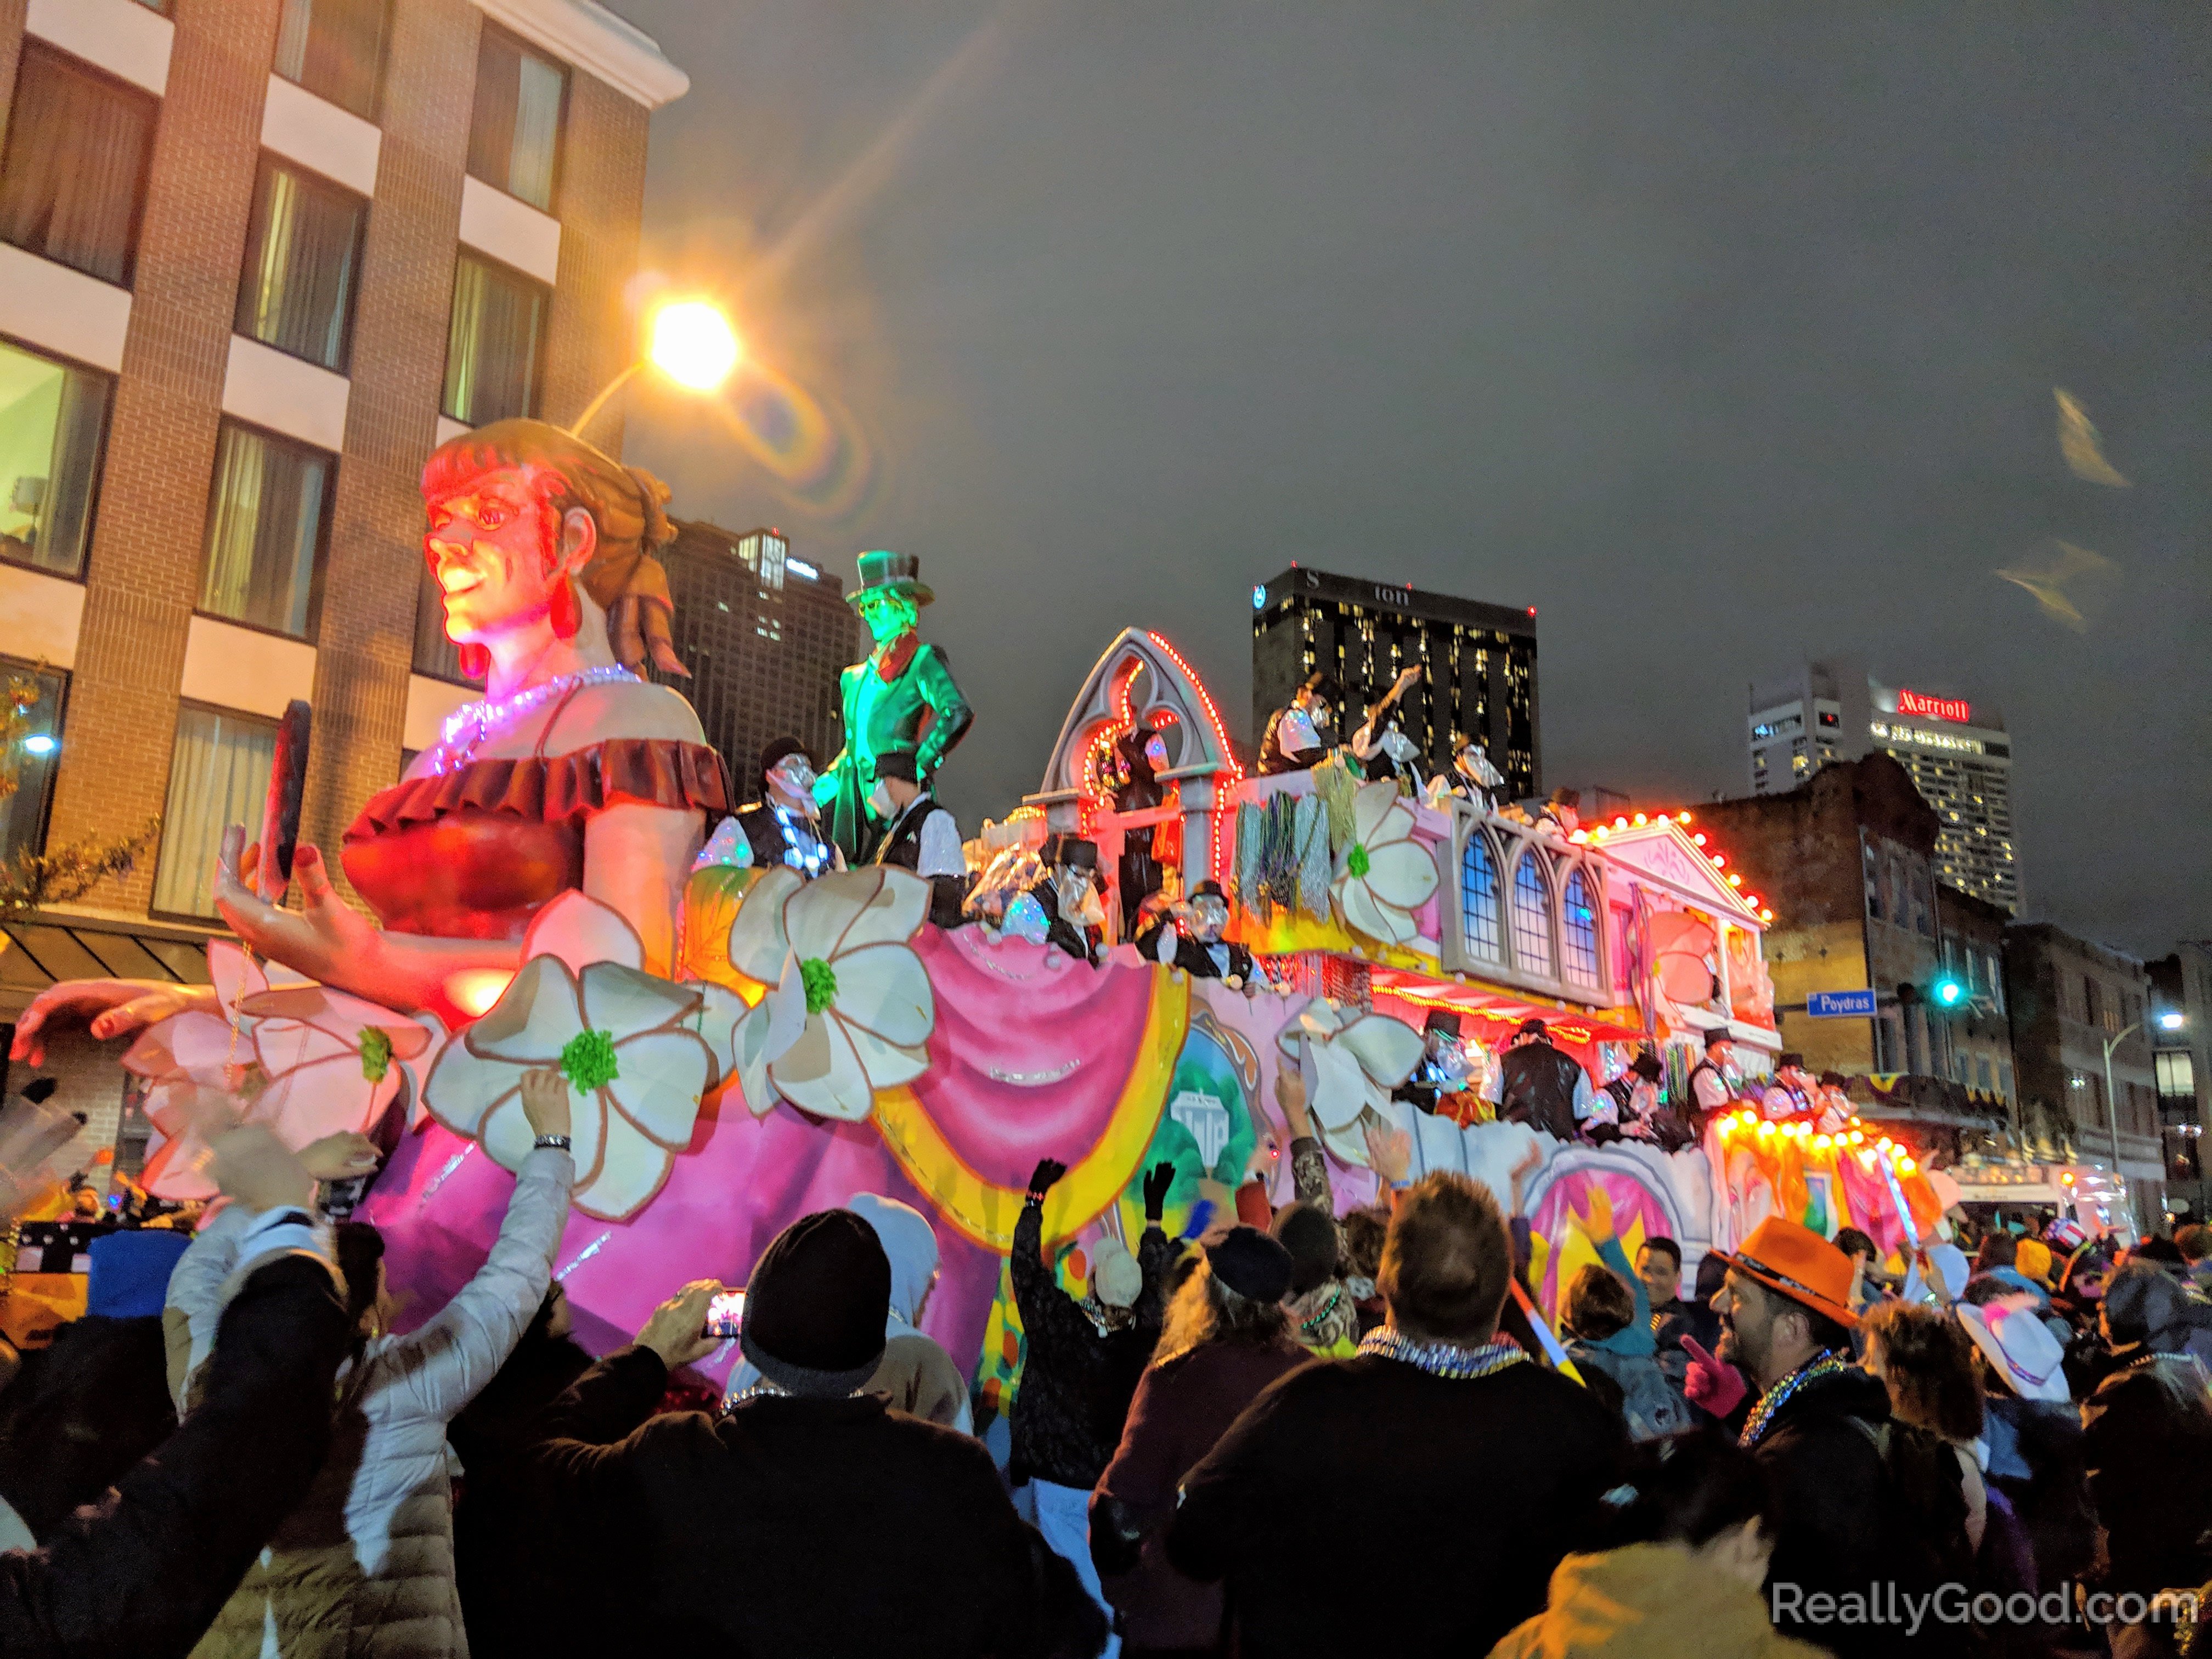 Mardi gras parade in New Orleans